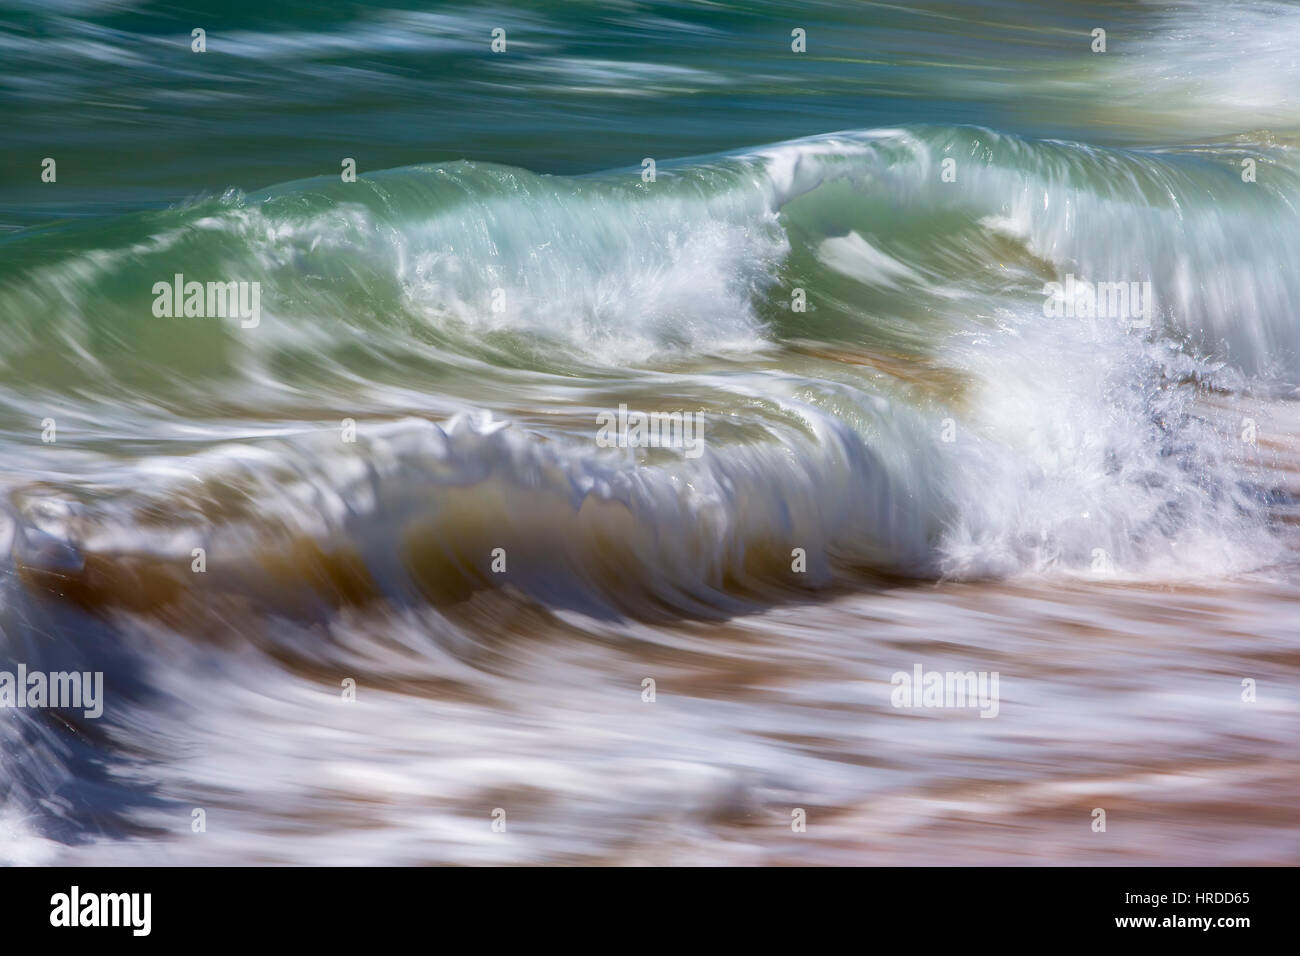 Rolling wave shot with slow shutter speed Stock Photo